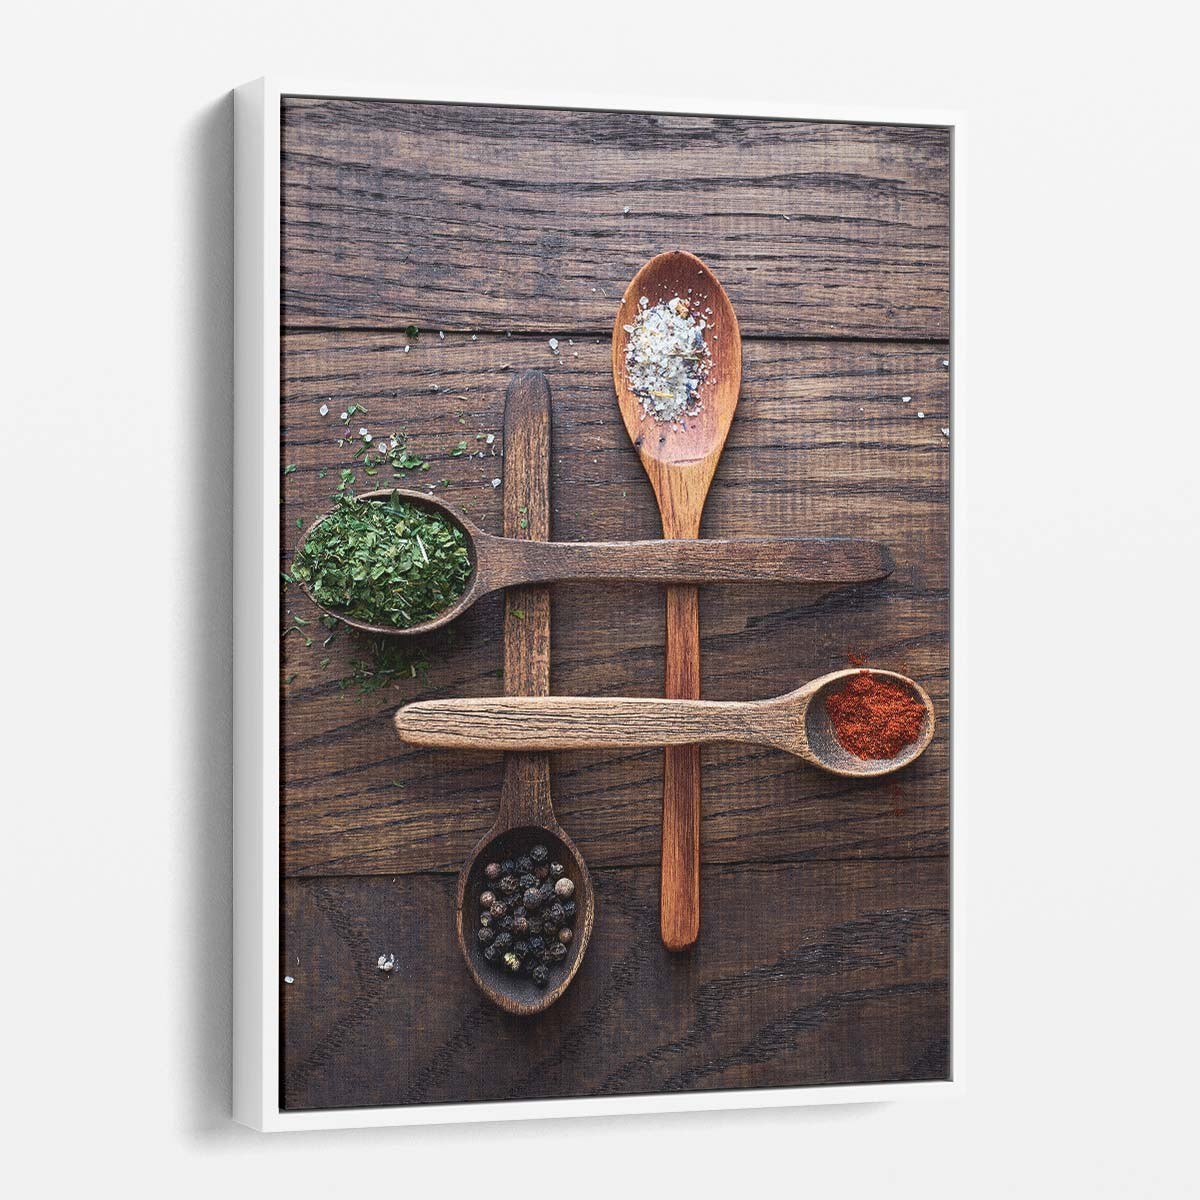 Rustic Kitchen Spice Photography Dried Spices in Wooden Spoons by Luxuriance Designs, made in USA